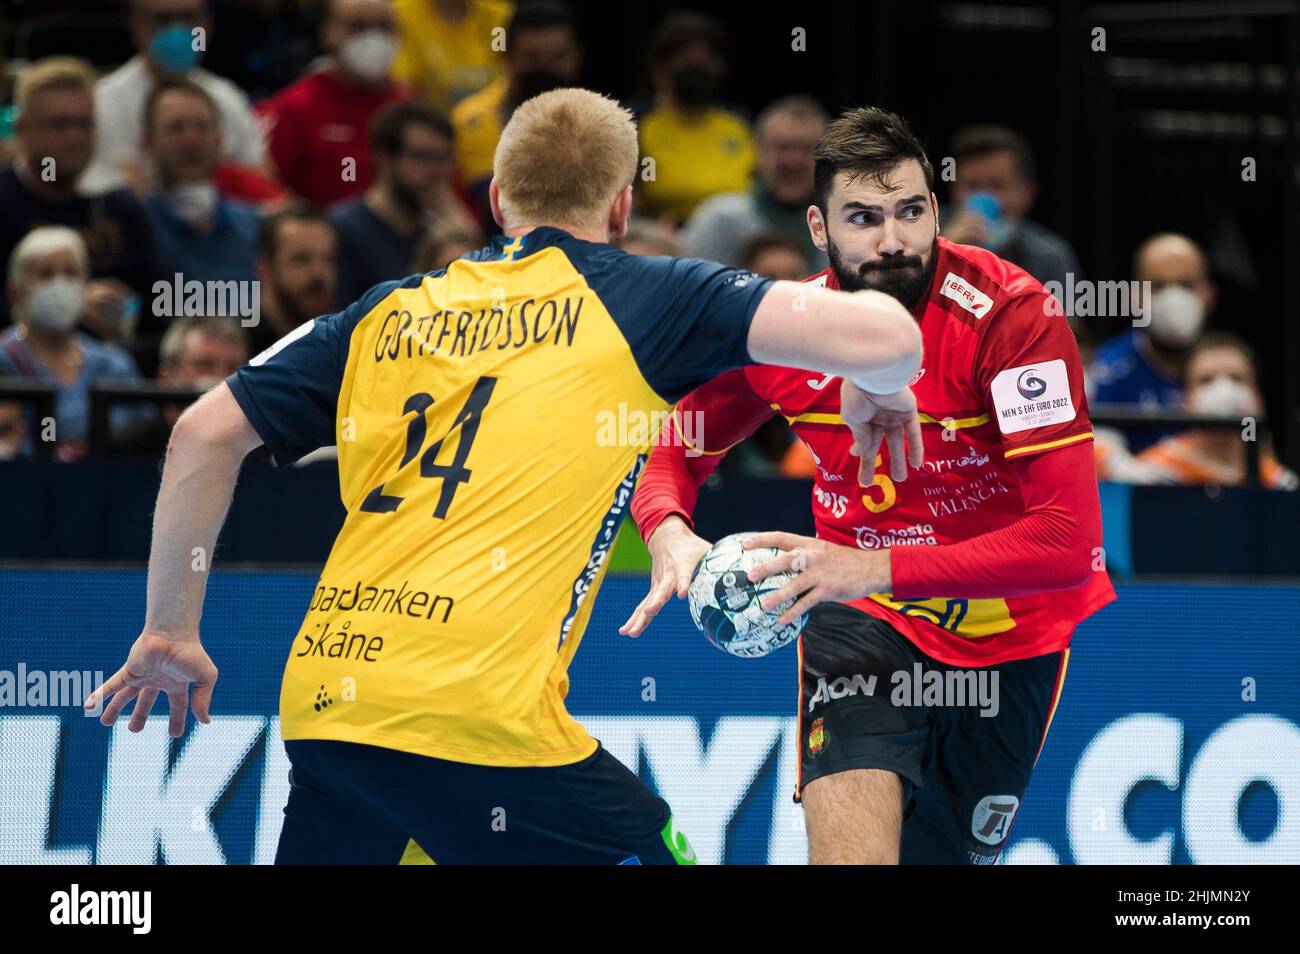 Budapest, Hungary, 30th January 2022. Jorge Maqueda Peno of Spain in action during the Men's EHF EURO 2022, Final Match match between Sweden v Spain in Budapest, Hungary. January 30, 2022. Credit: Nikola Krstic/Alamy Stock Photo